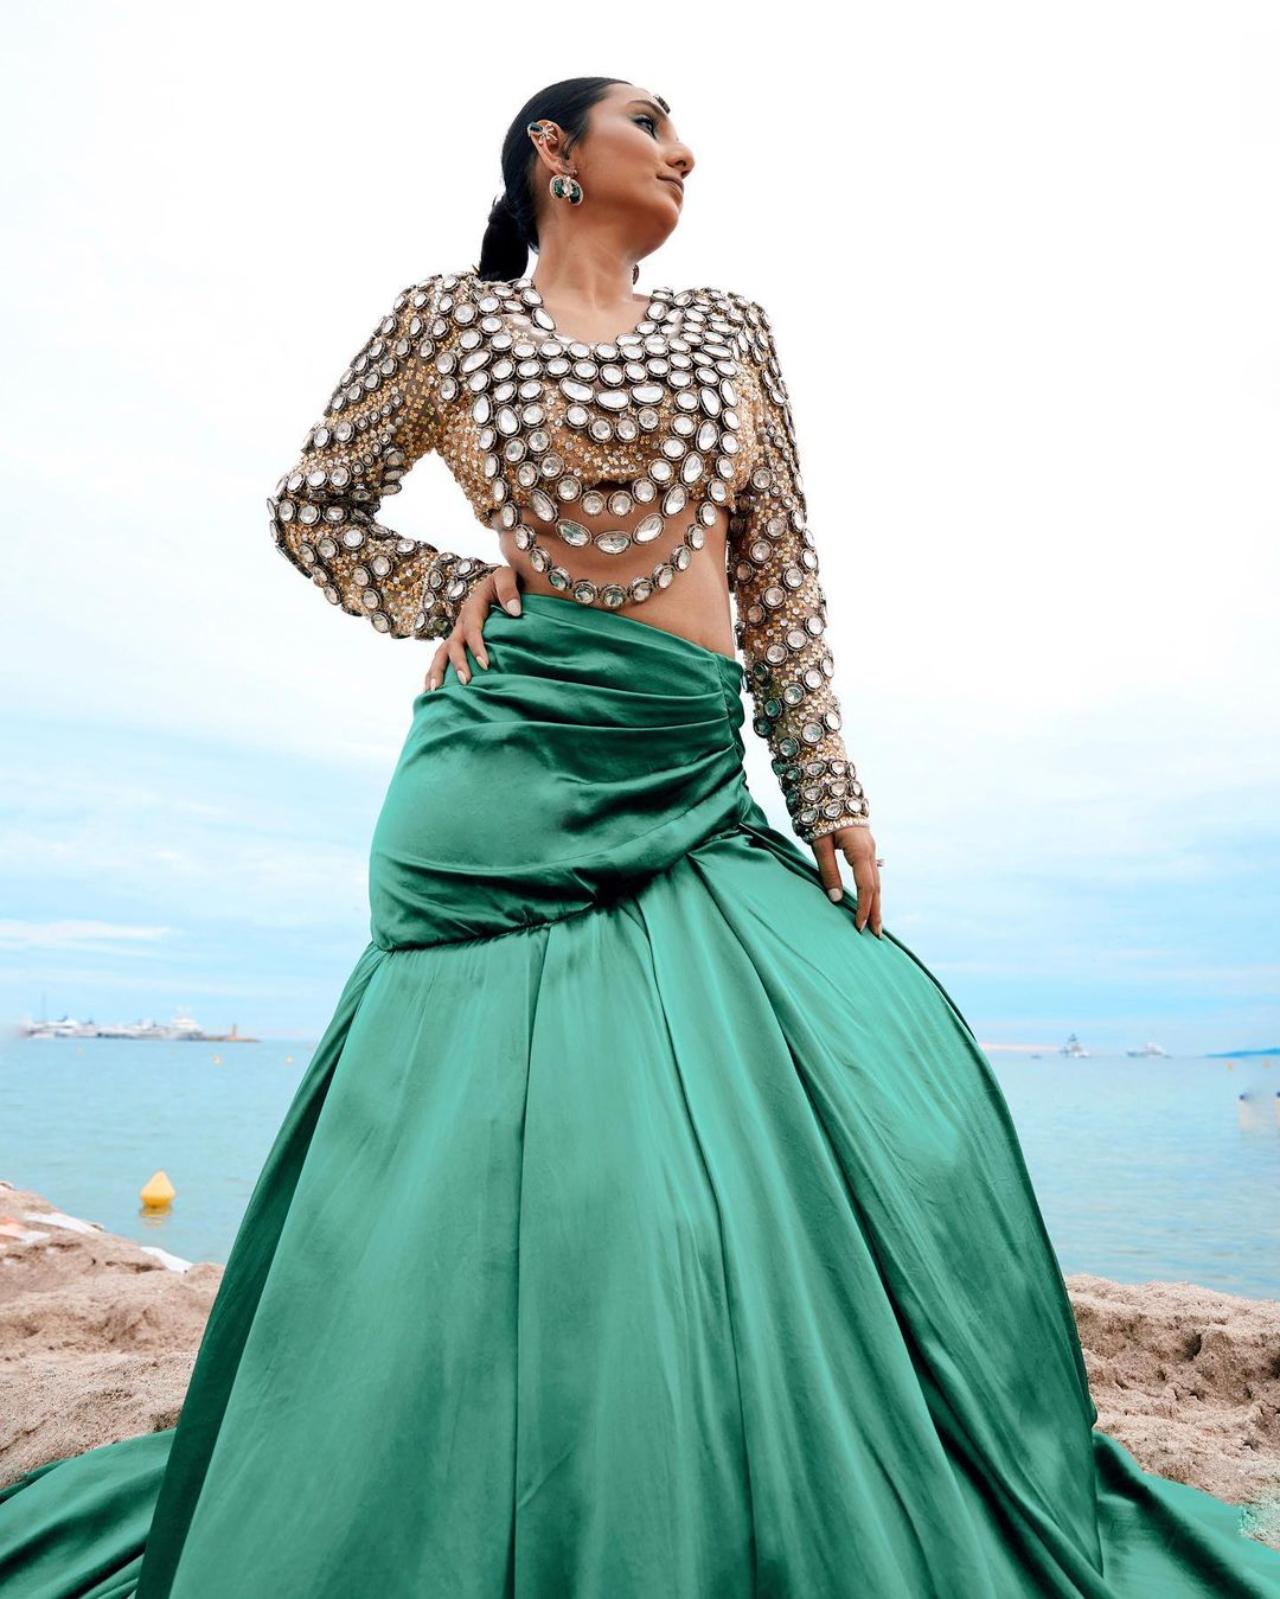 Stunning in a beautiful custom gown by the Abu Jani and Sandeep Khosla label, Masoom looked ethereal in her emerald green silk skirt and a gold blouse, dripping in crystals!